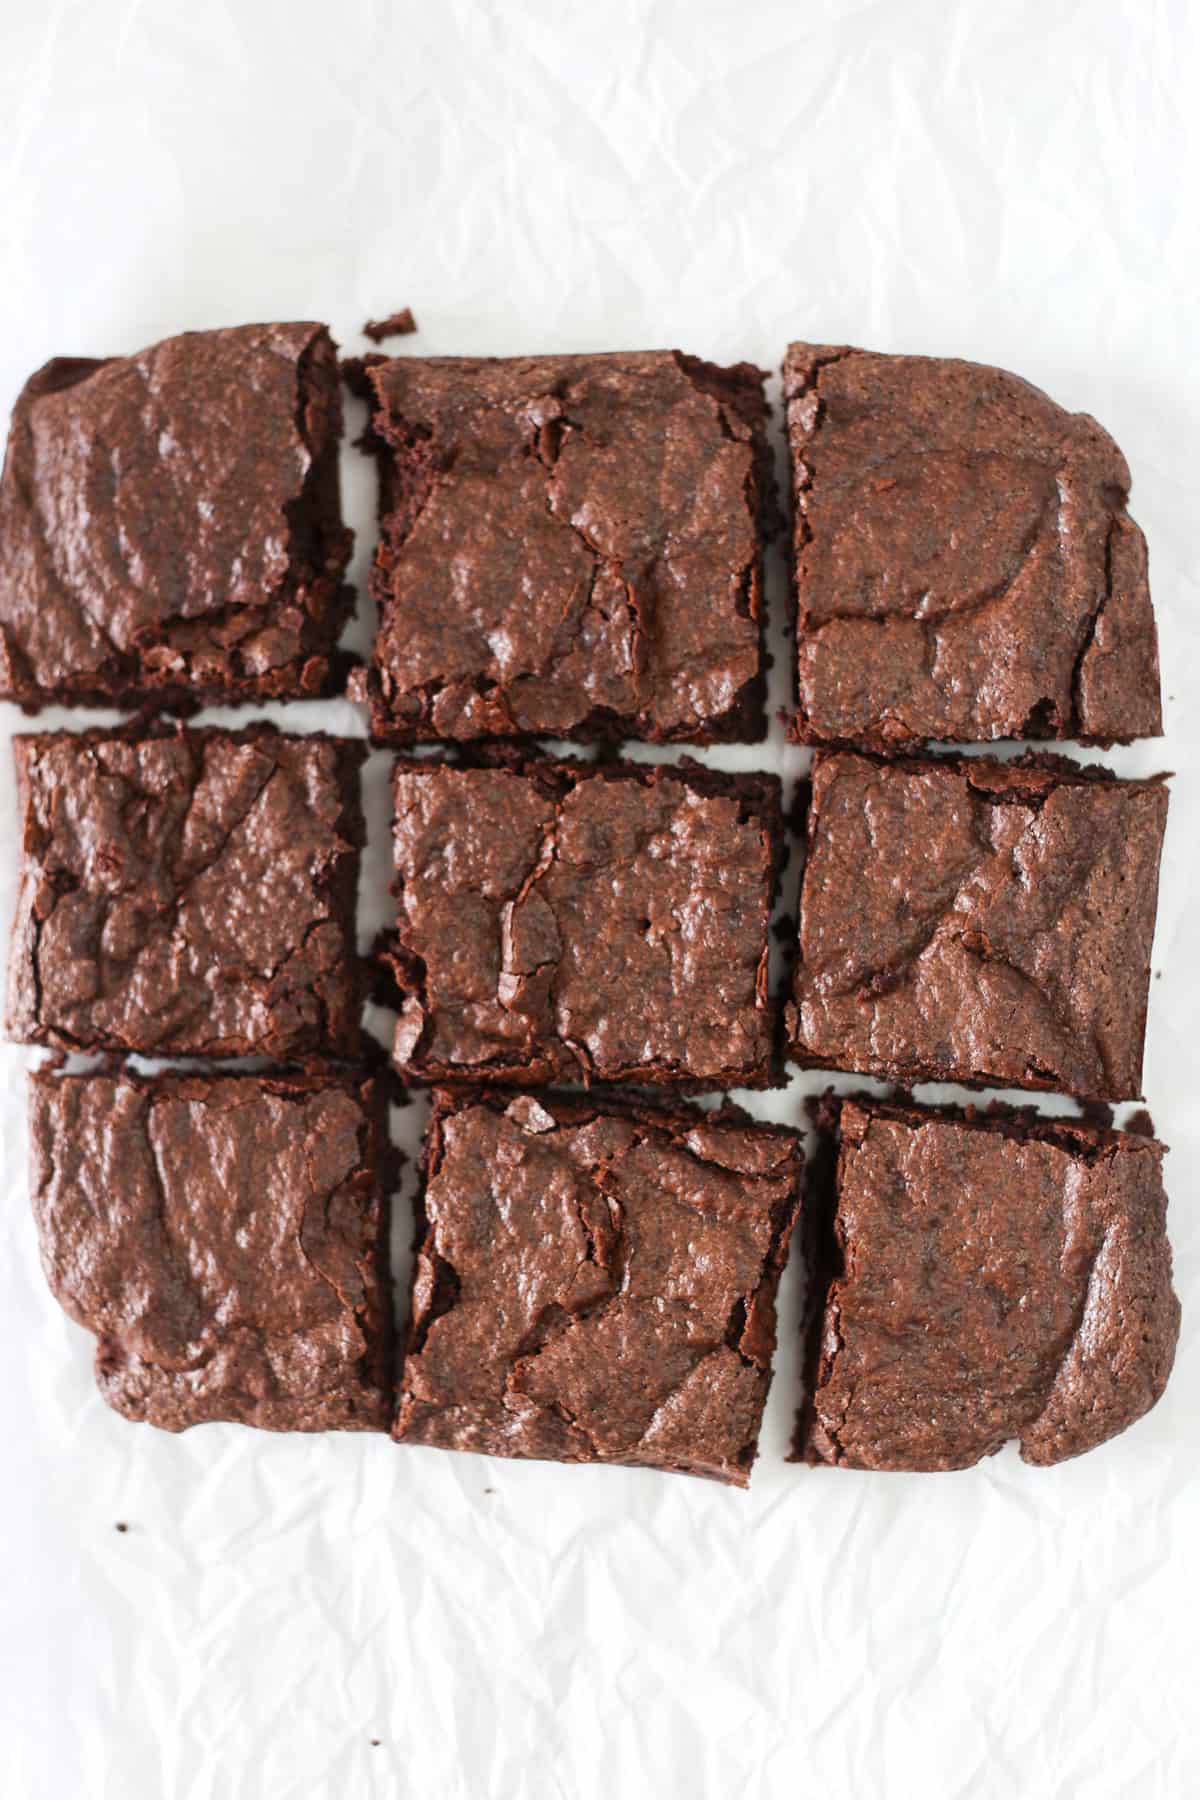 Cooked brownies on parchment paper cut into squares.